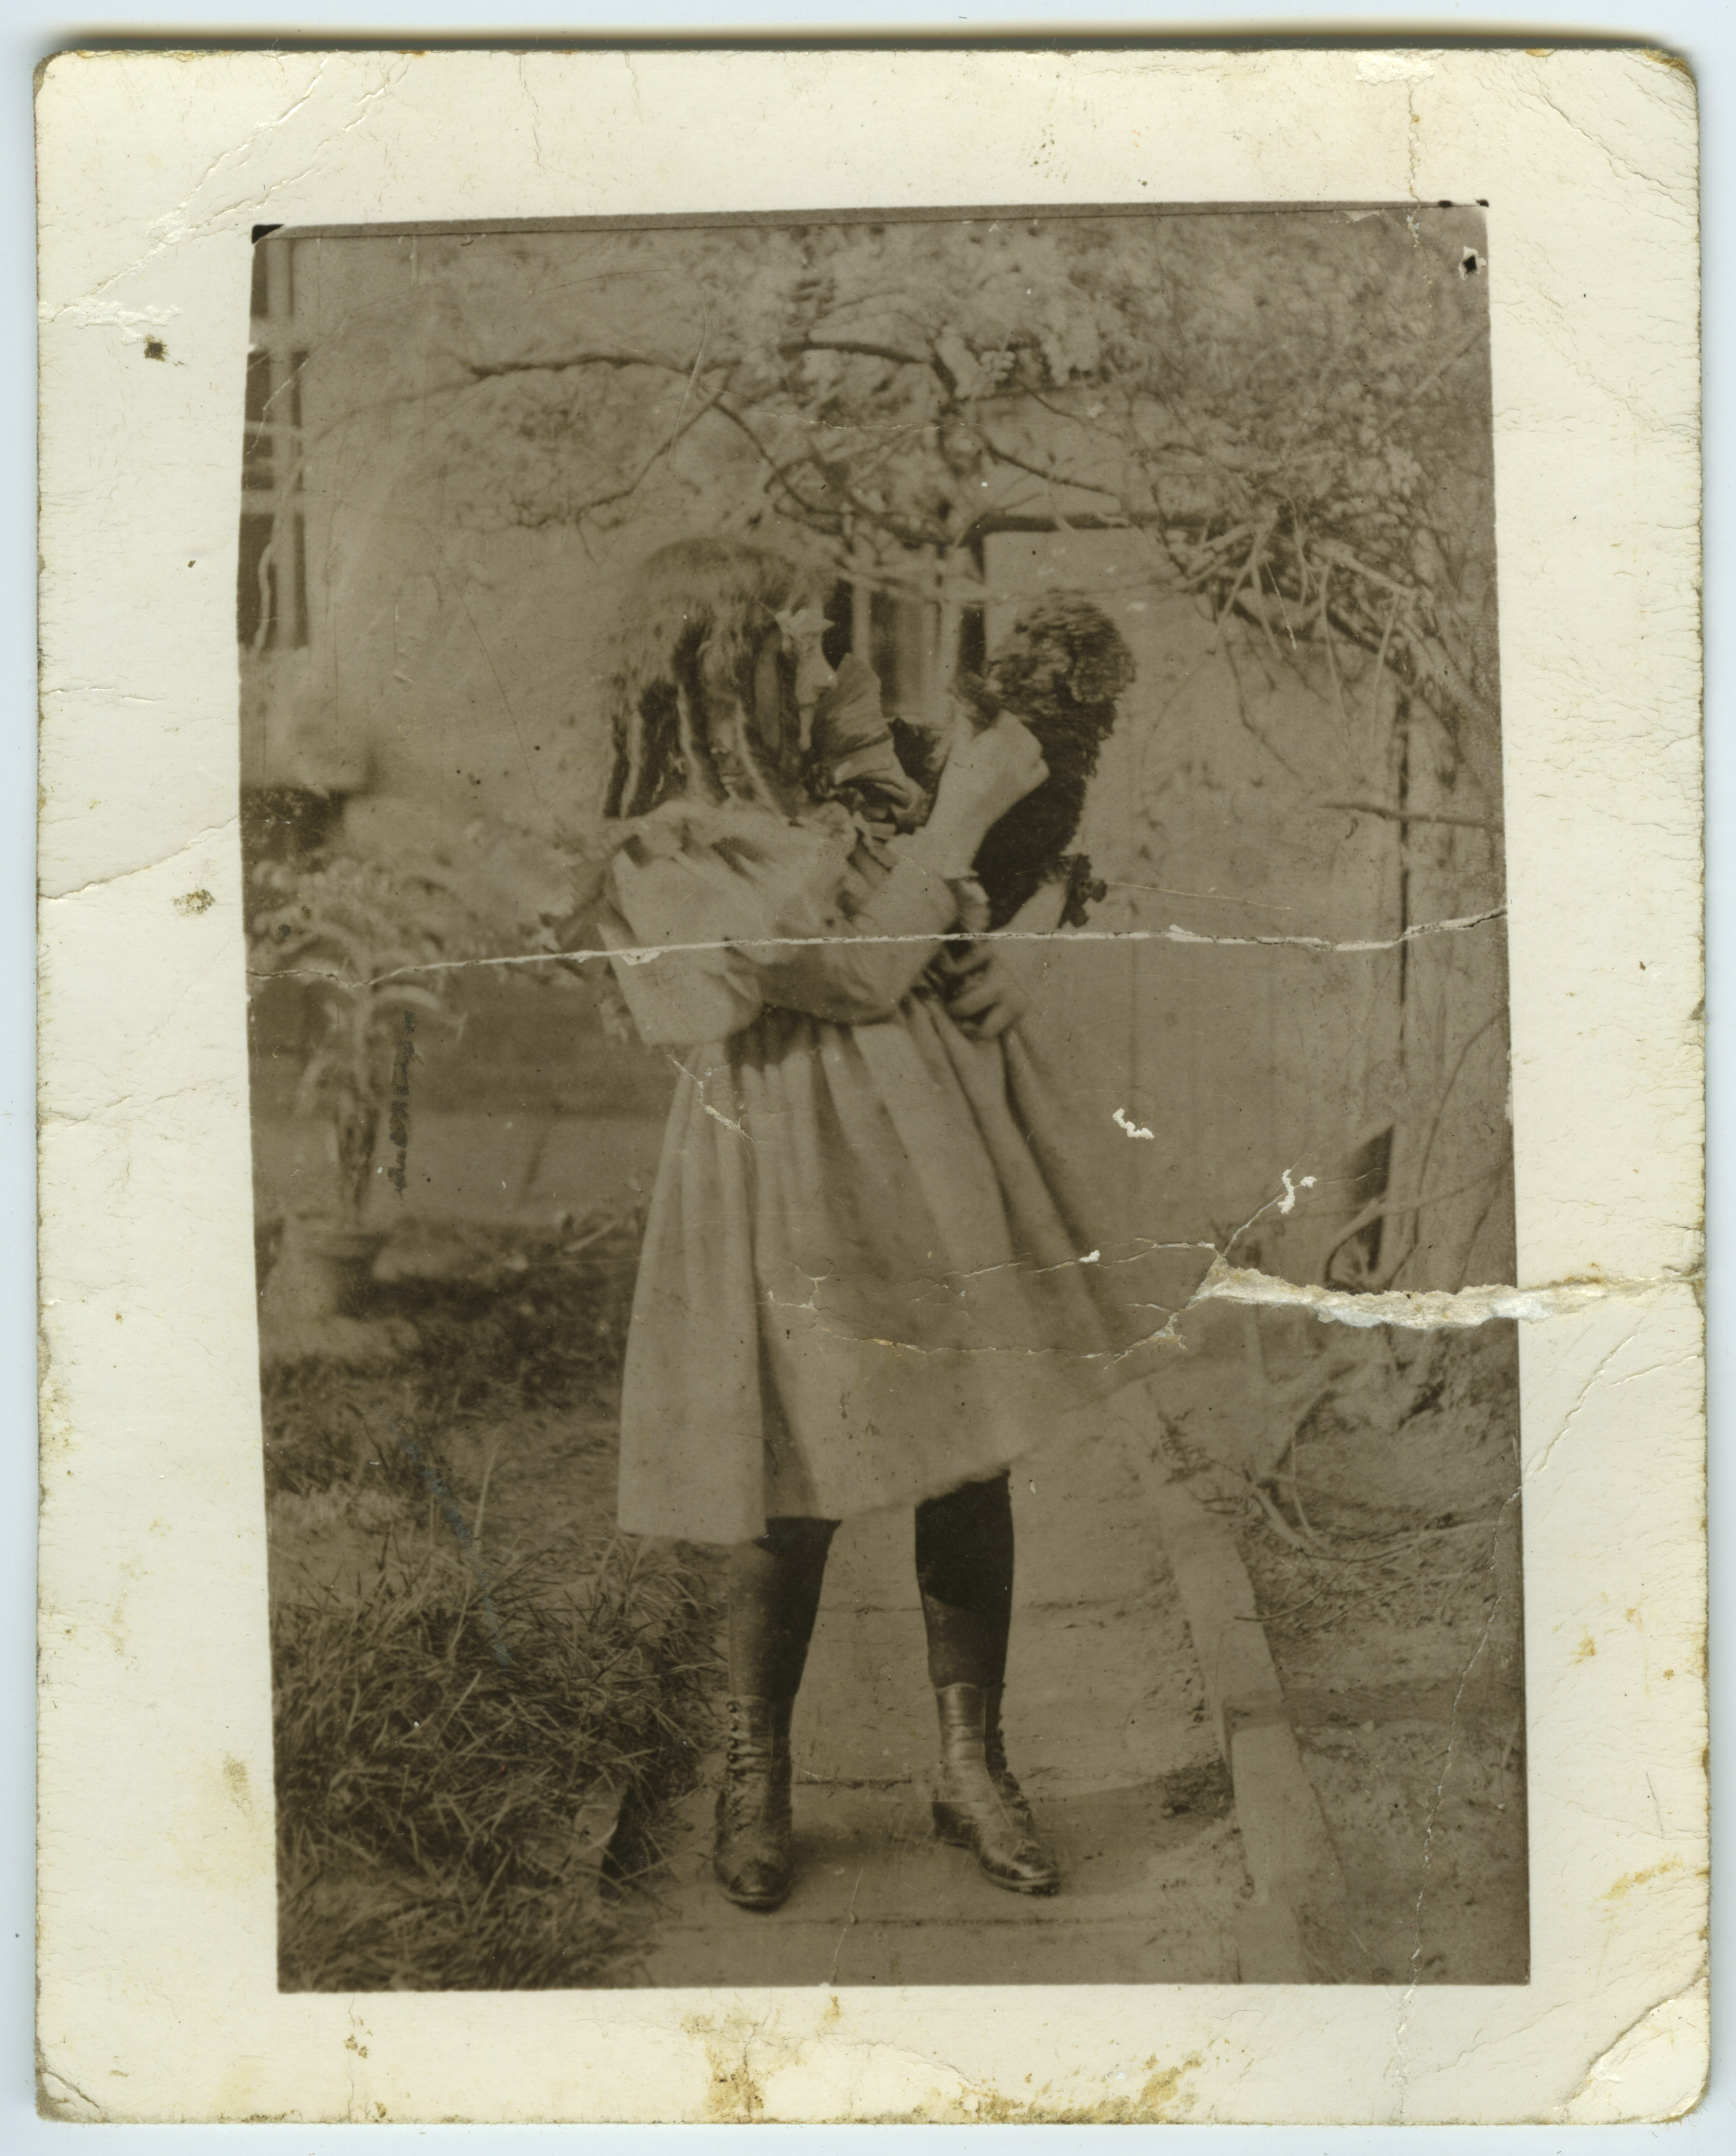 Early Photographs of Mana-Zucca | FIU Special Collections
